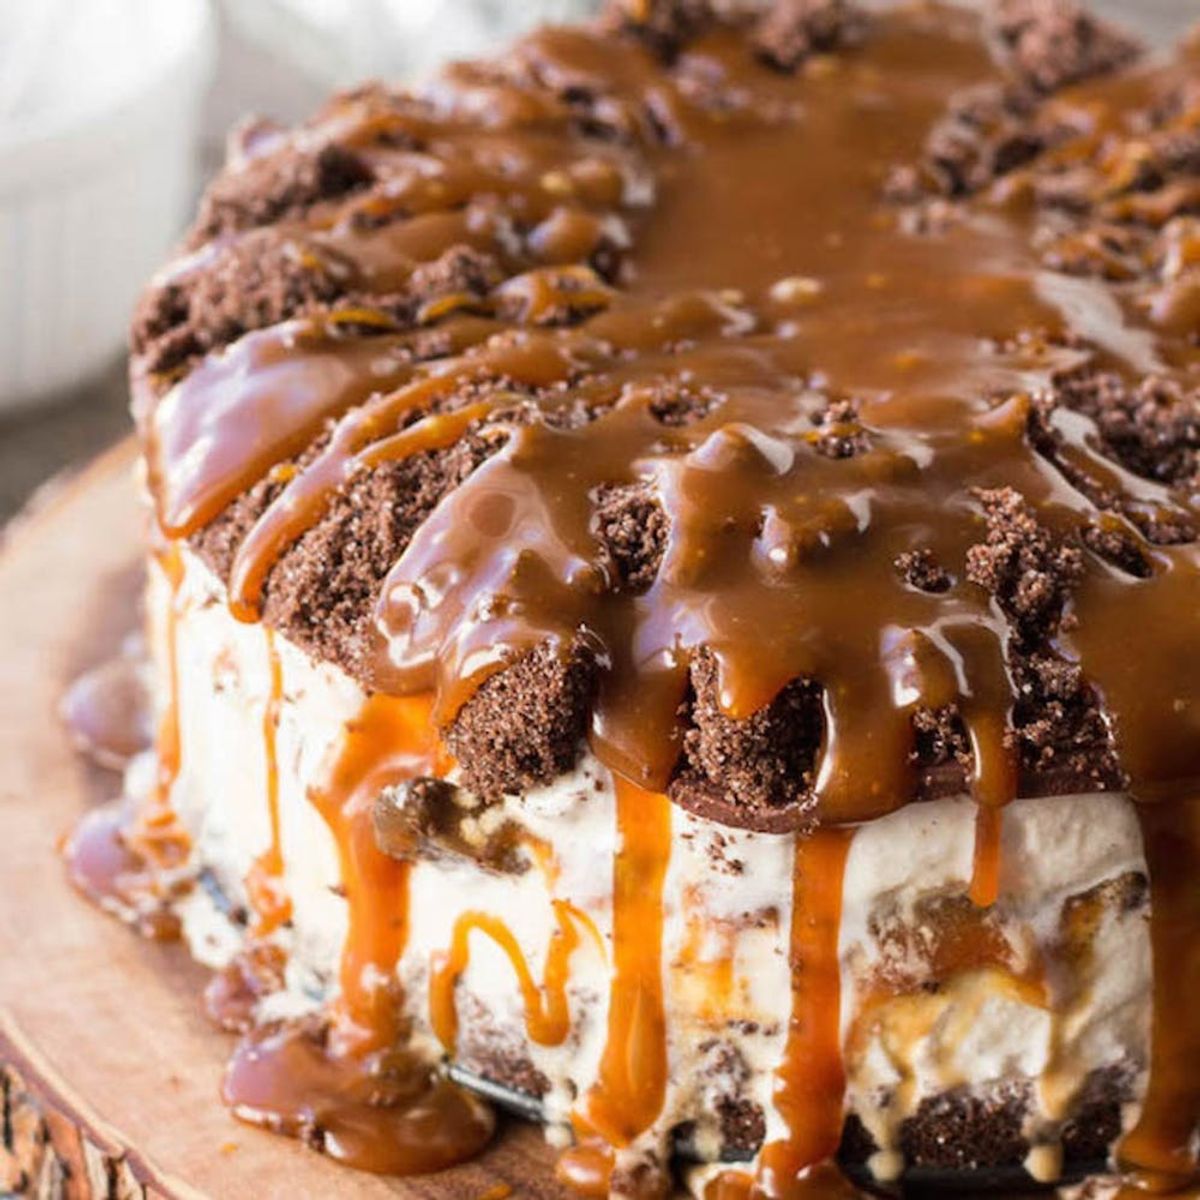 17 Indulgent Ice Cream Cakes for Your Labor Day Bash